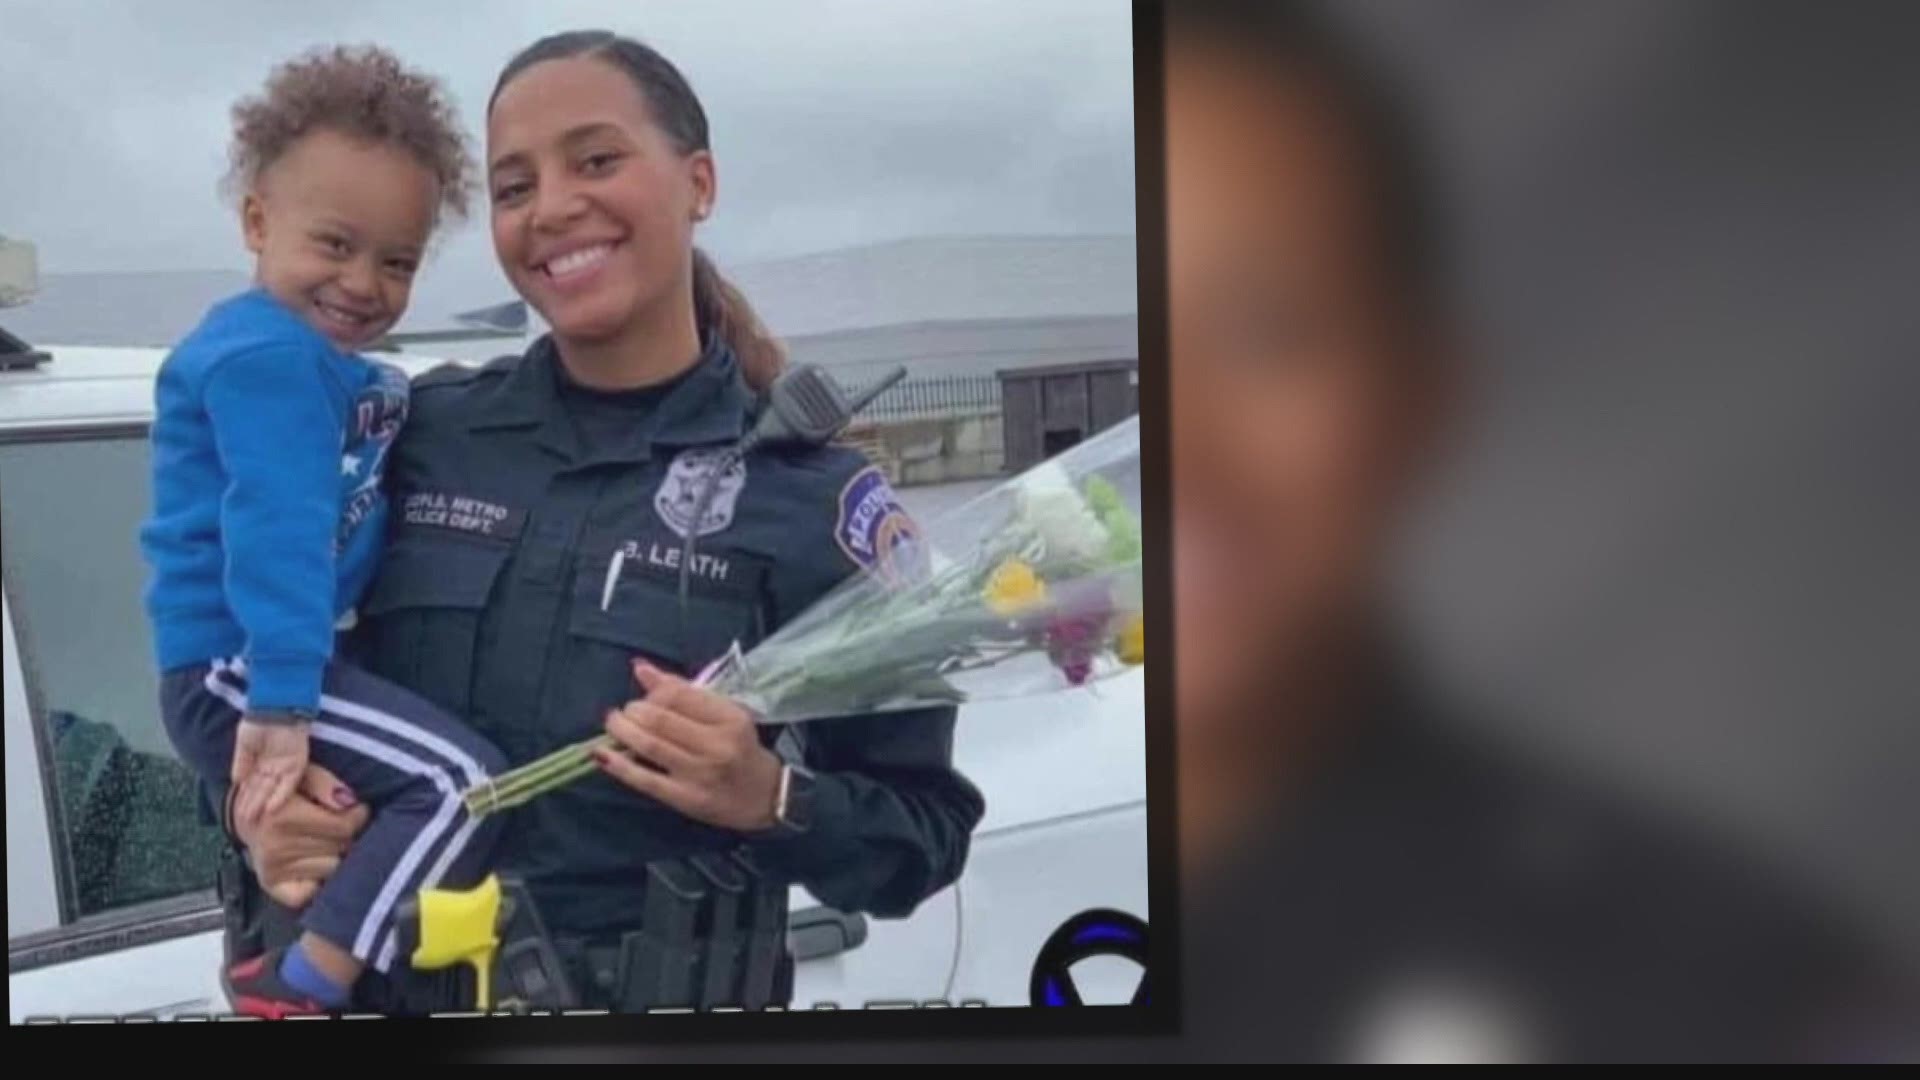 Officer Breann Leath was killed while responding to a domestic violence call April 9, 2020.